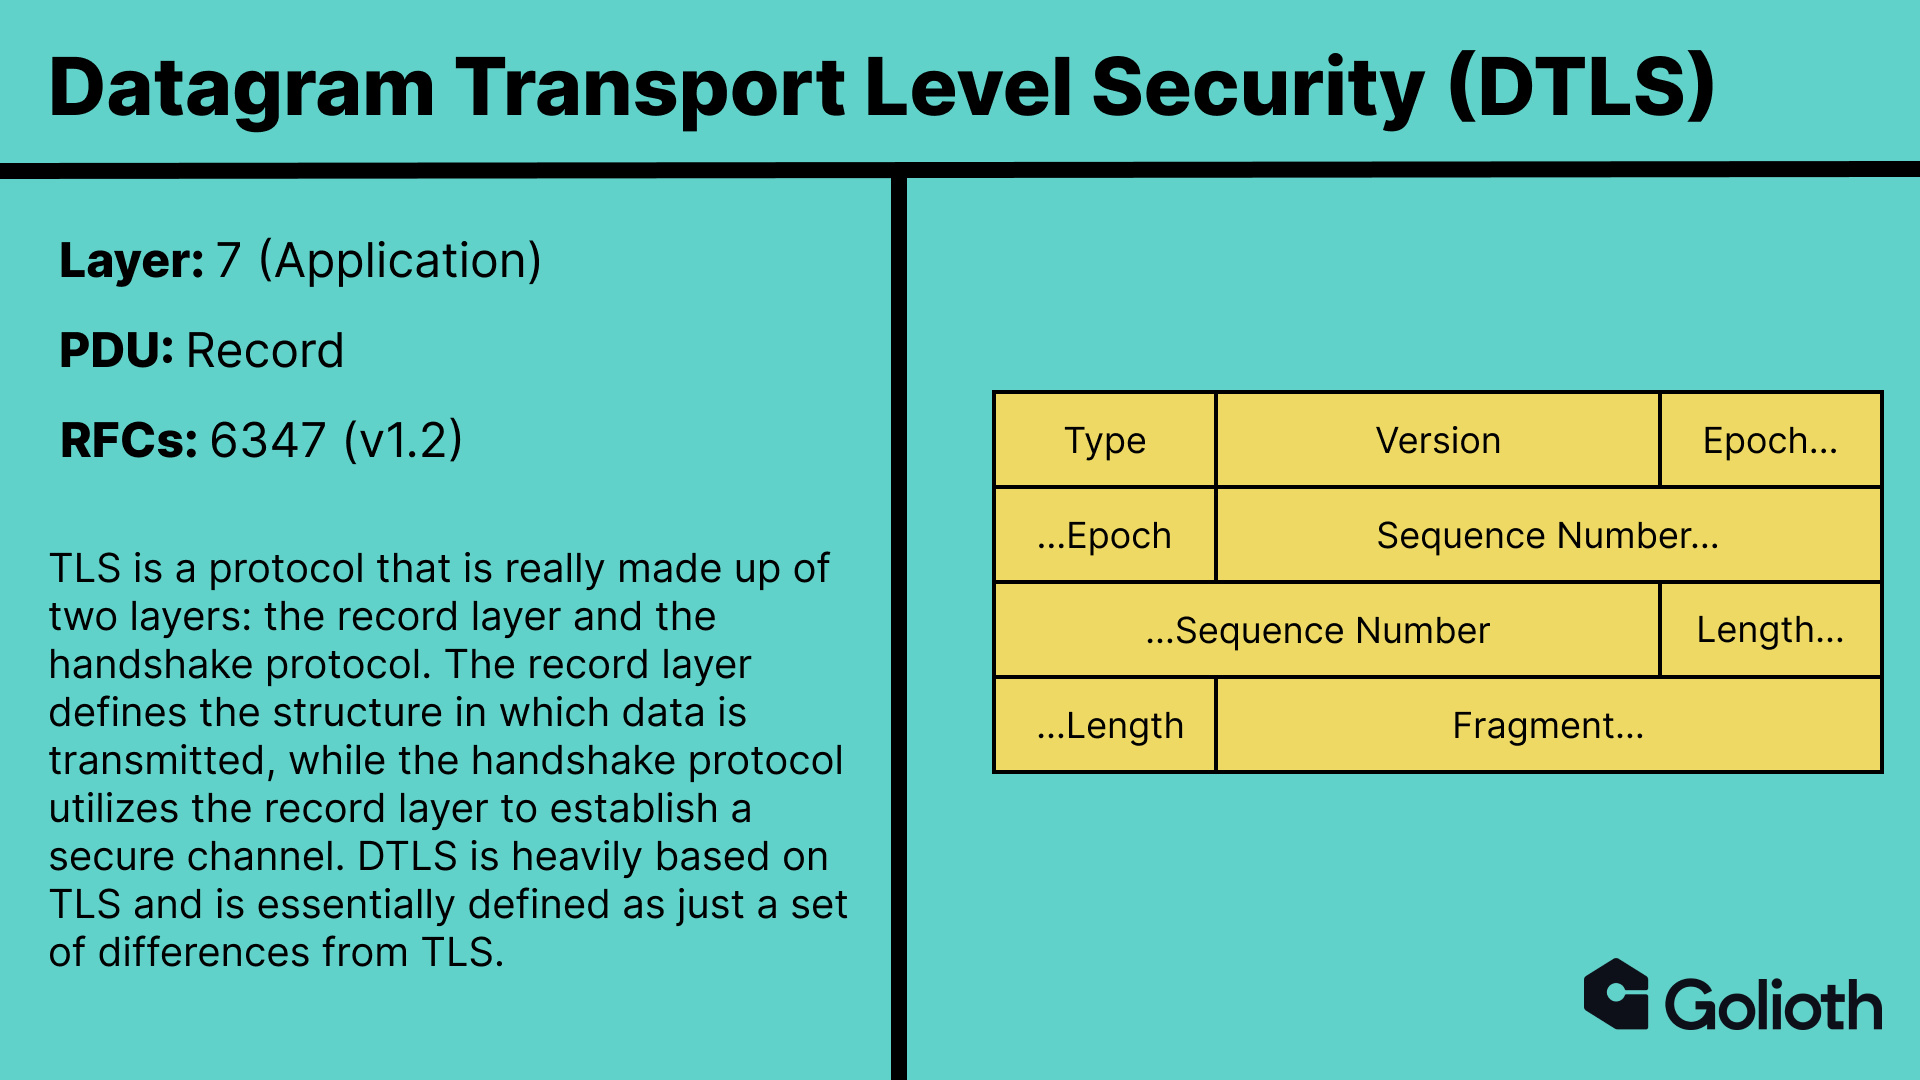 Description of the Datagram Transport Level Security (DTLS) protocol with a diagram.